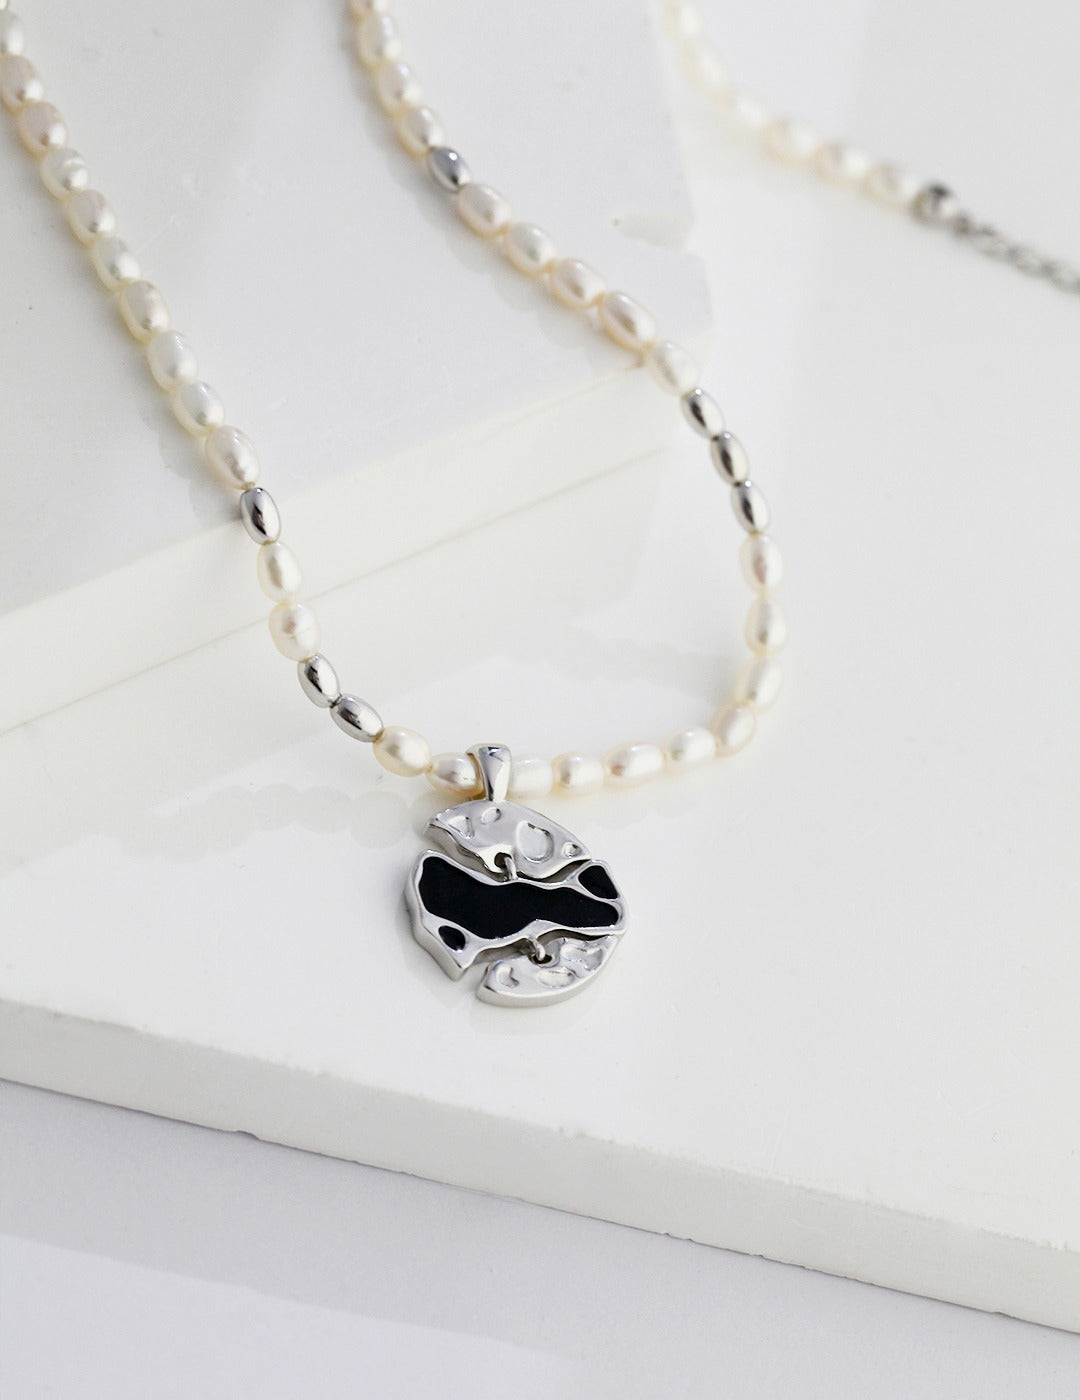 Exquisite S925 Silver Pearl Necklace with Irregular Texture and Black Enamel Accents